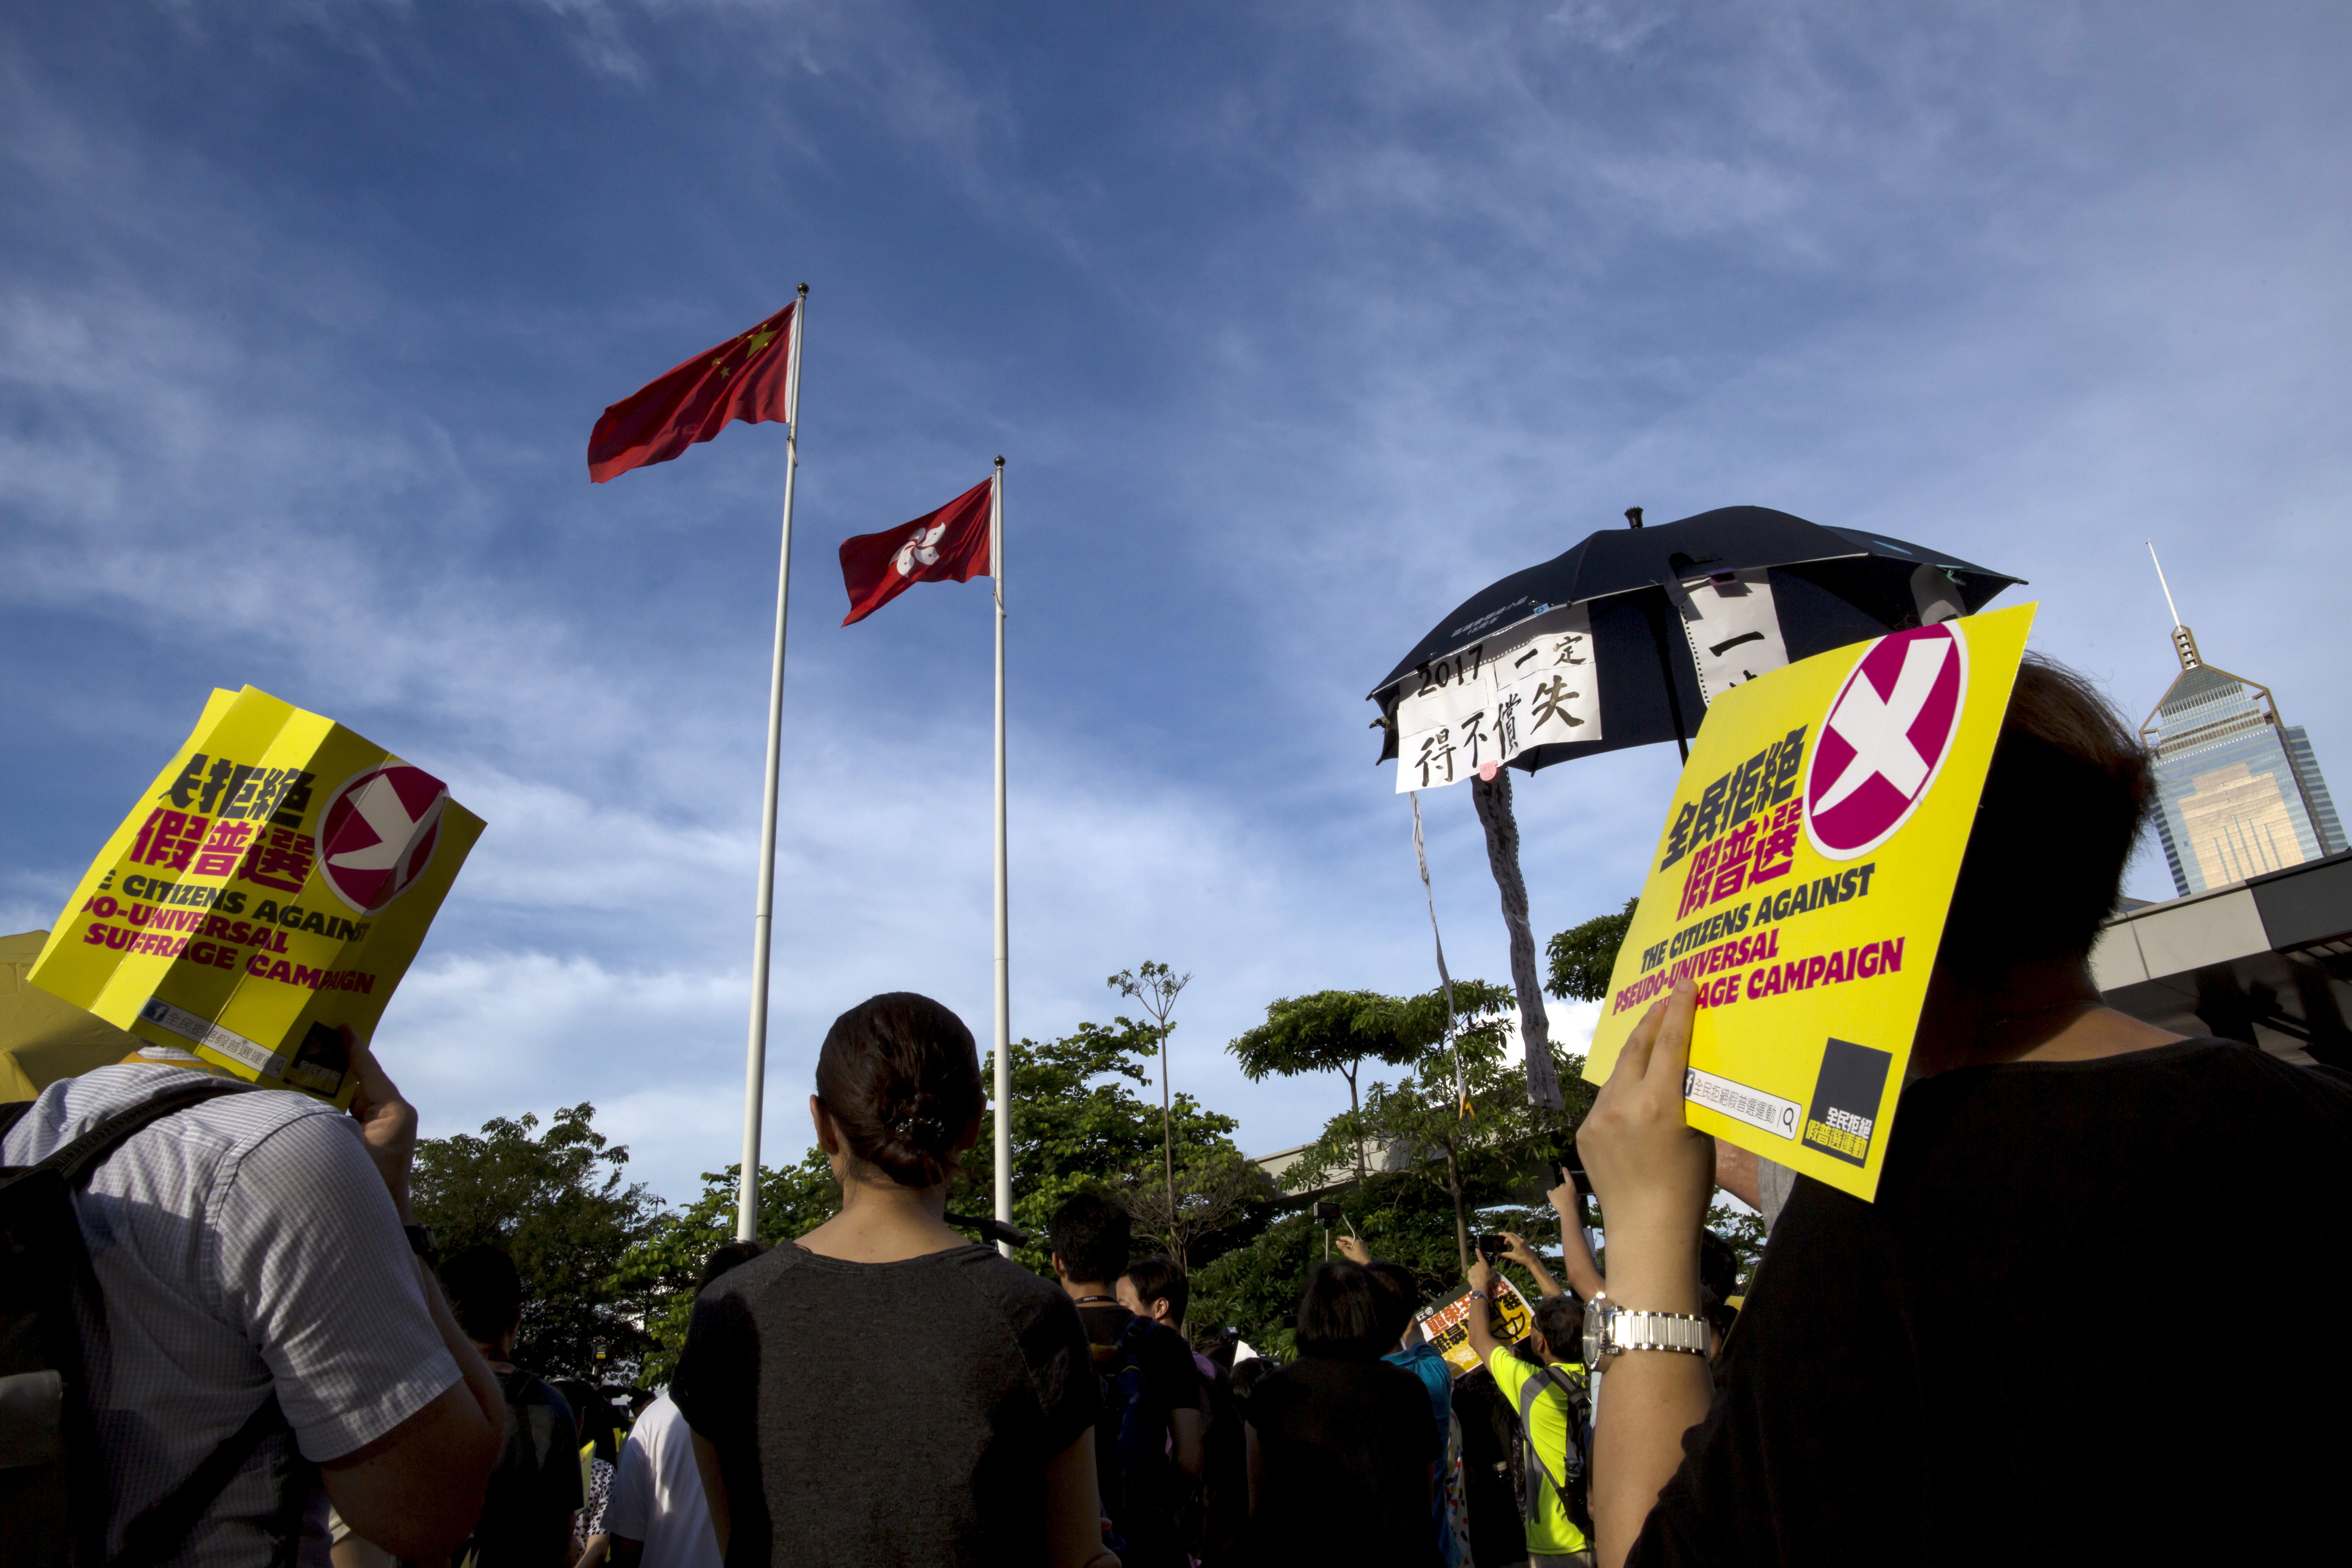 Pro-democracy protesters hold signs during a march under Hong Kong flags outside the Legislative Council building in Hong Kong, China